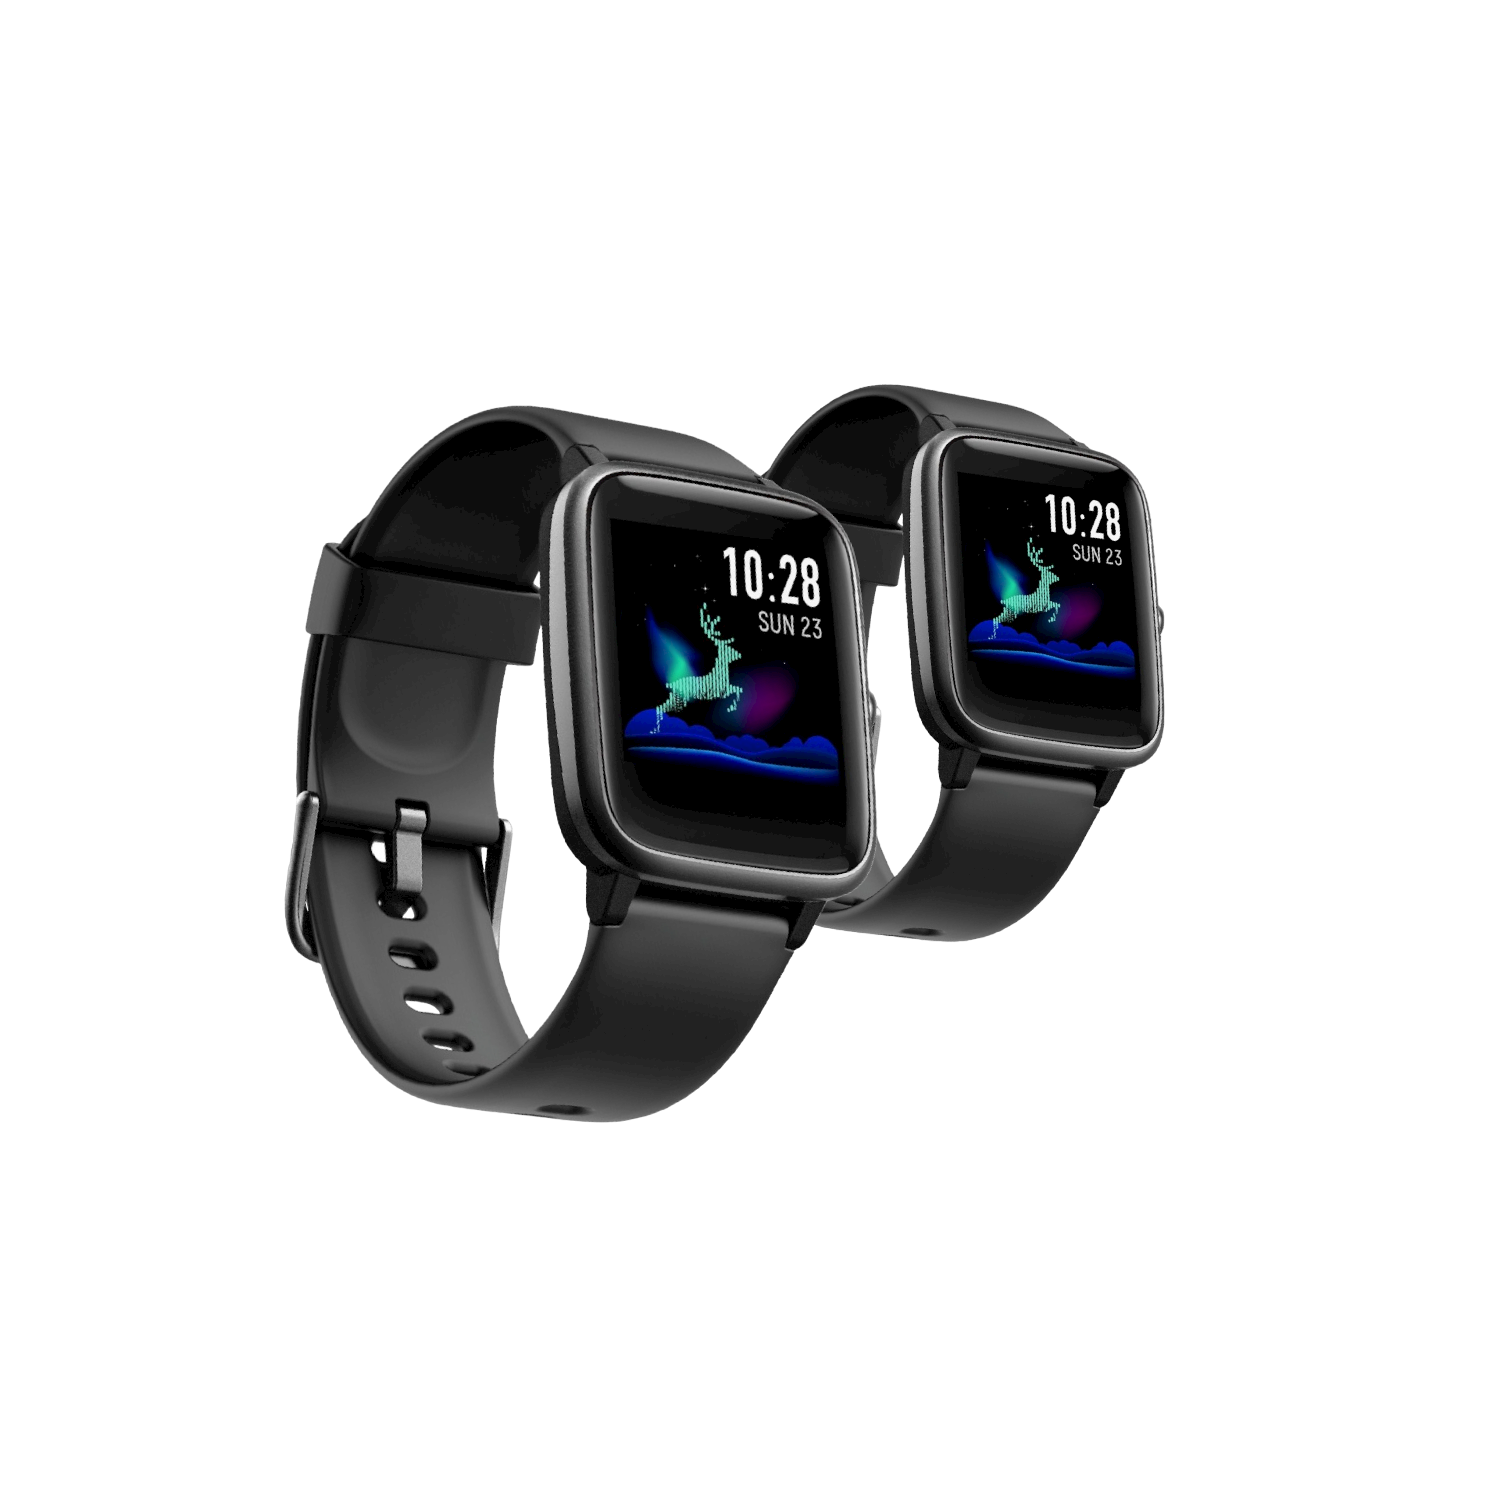 ULTREND | Gleam | Fitness Tracker | Smart Watch for Android and iPhones - Set of 2 Watches - Black